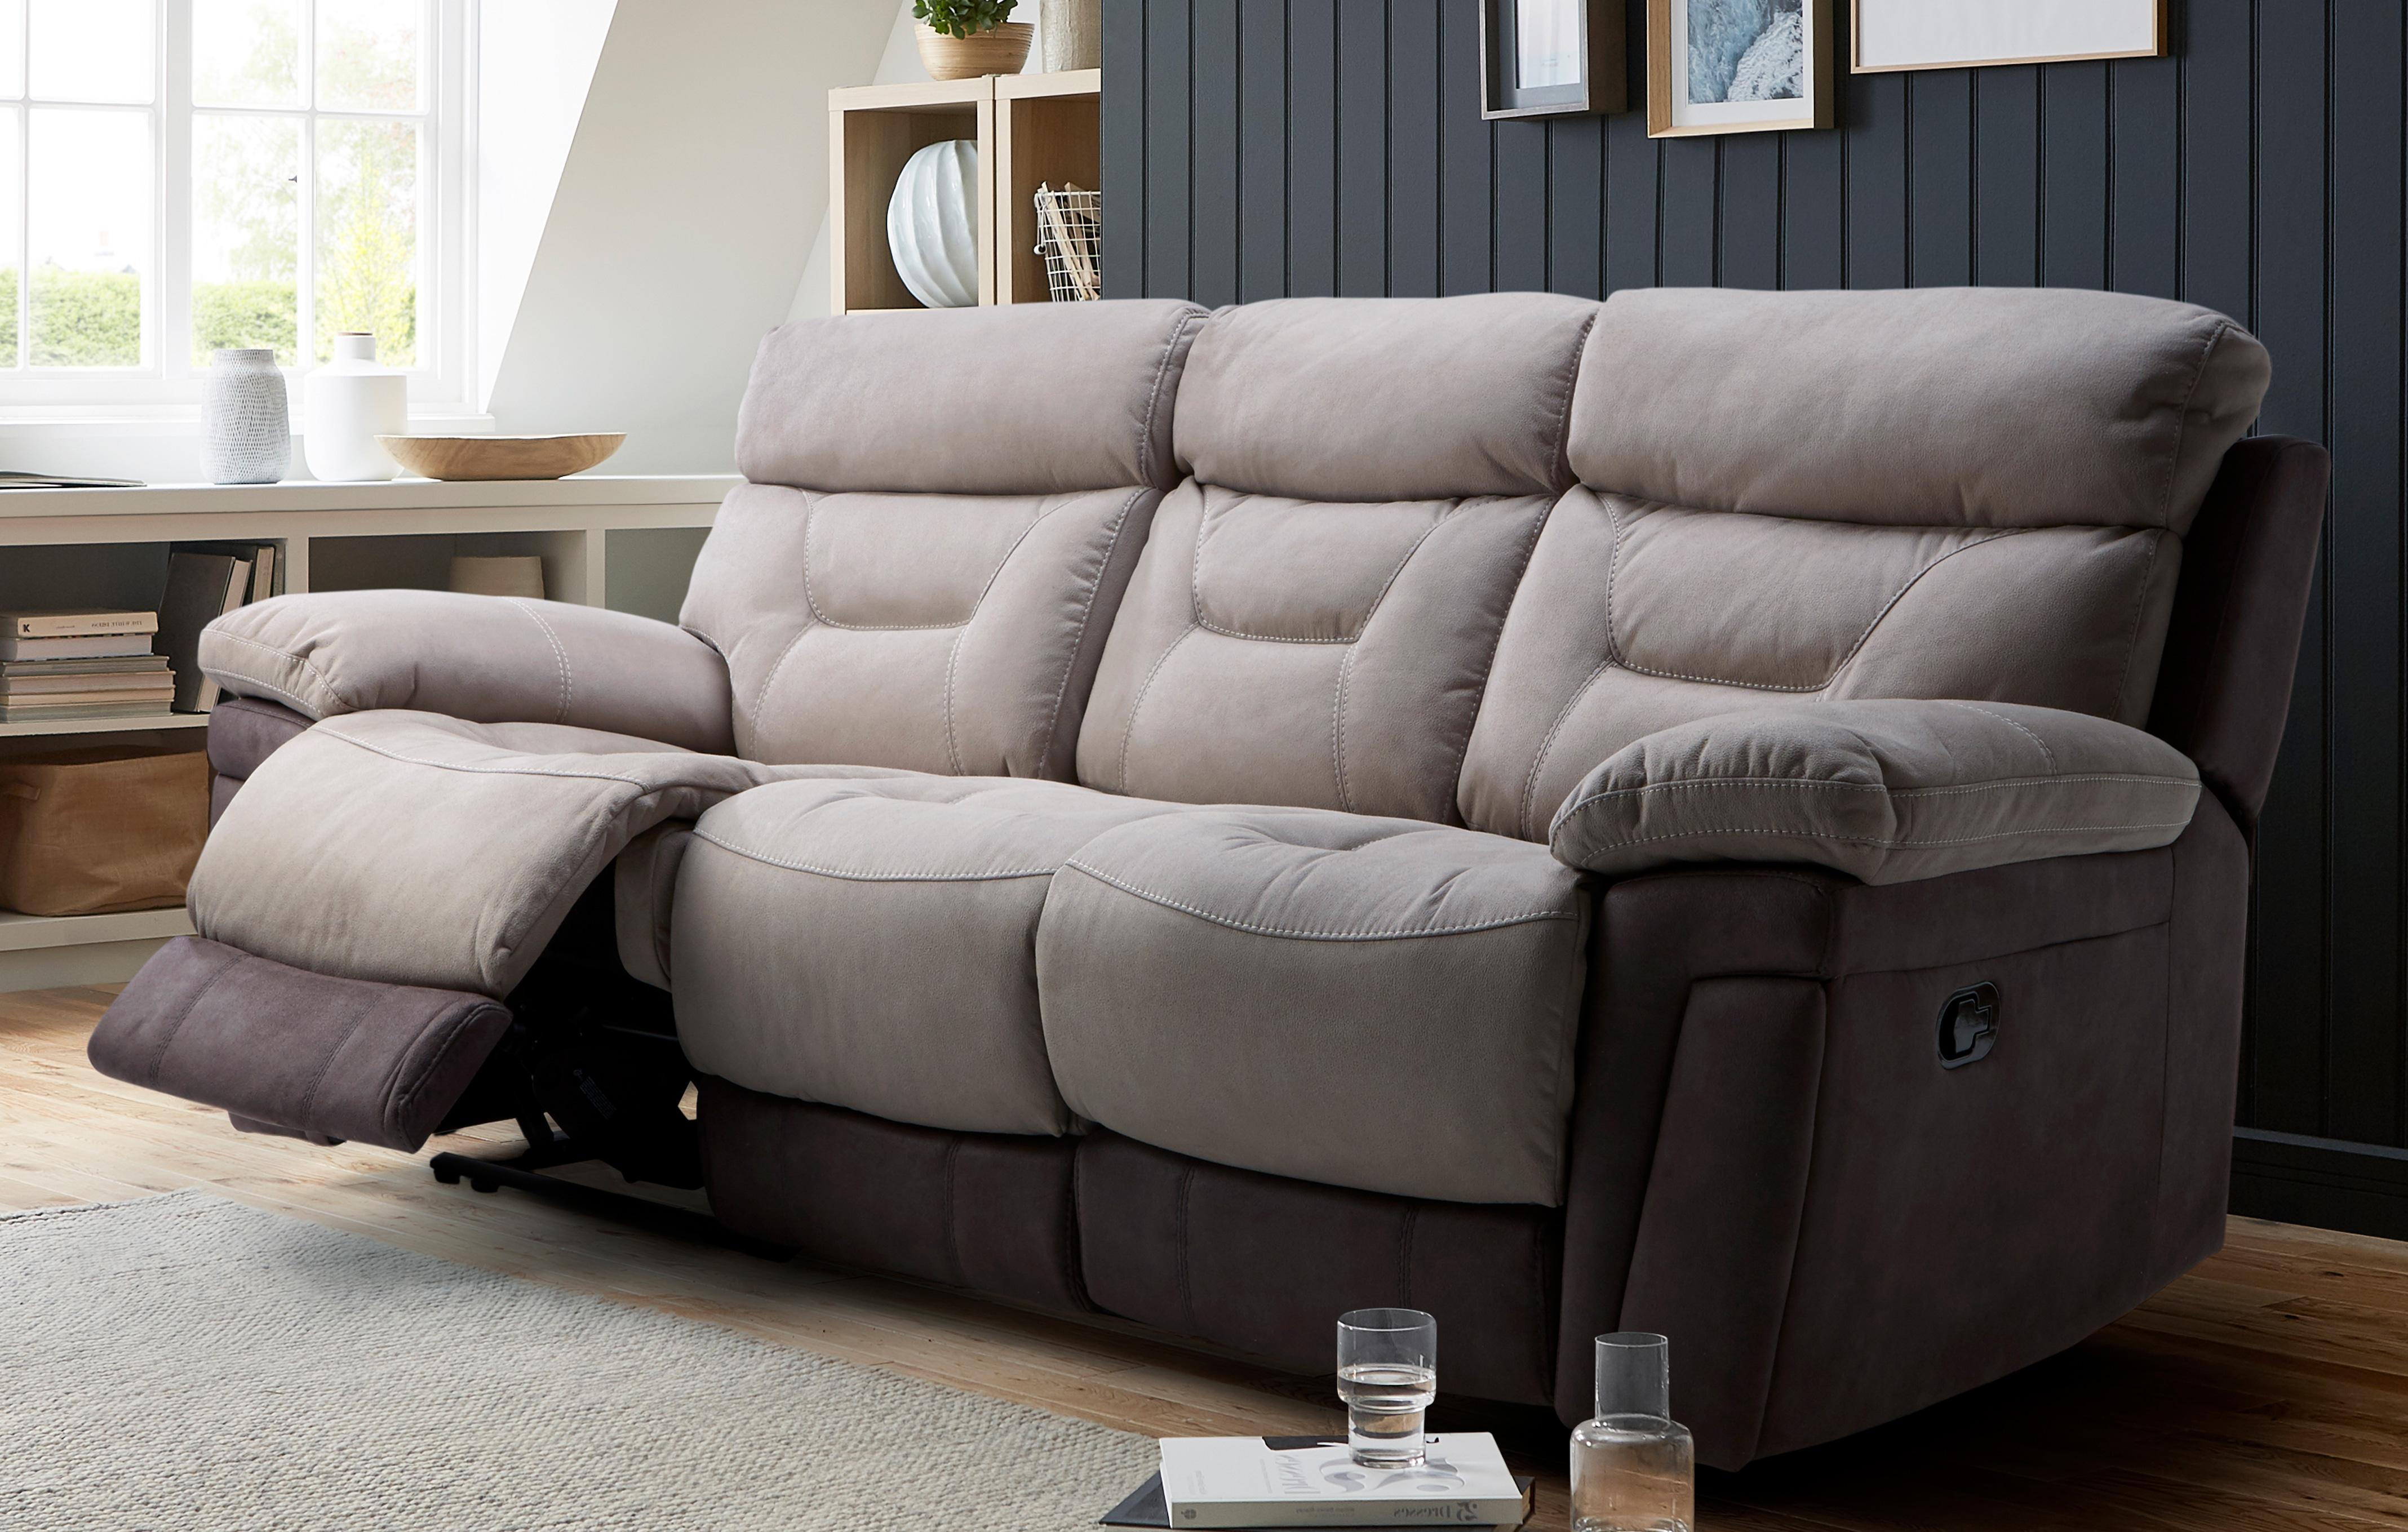 Our Full Range Fabric & Leather Recliner Sofas | DFS